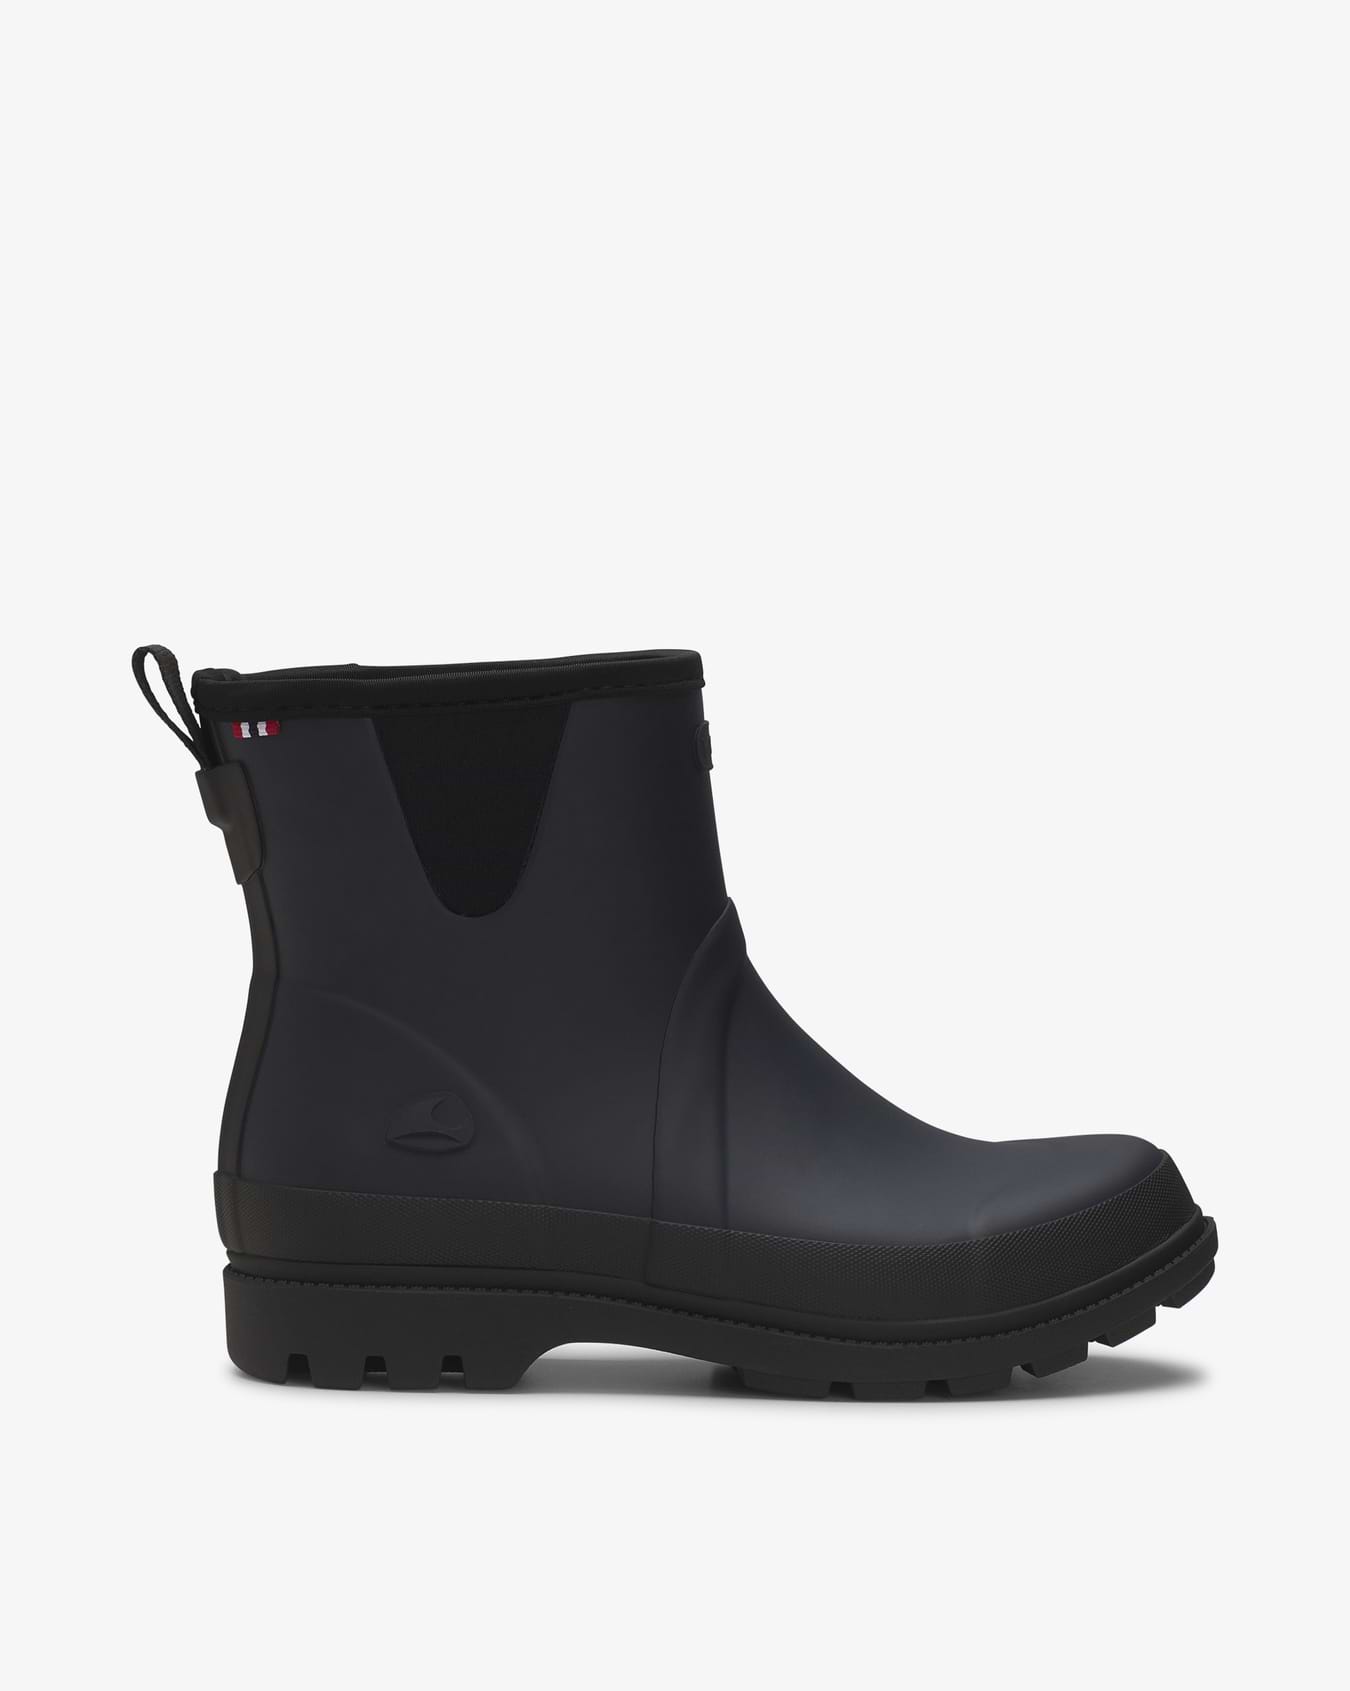 Noble Neo Navy/Black Rubber Boot